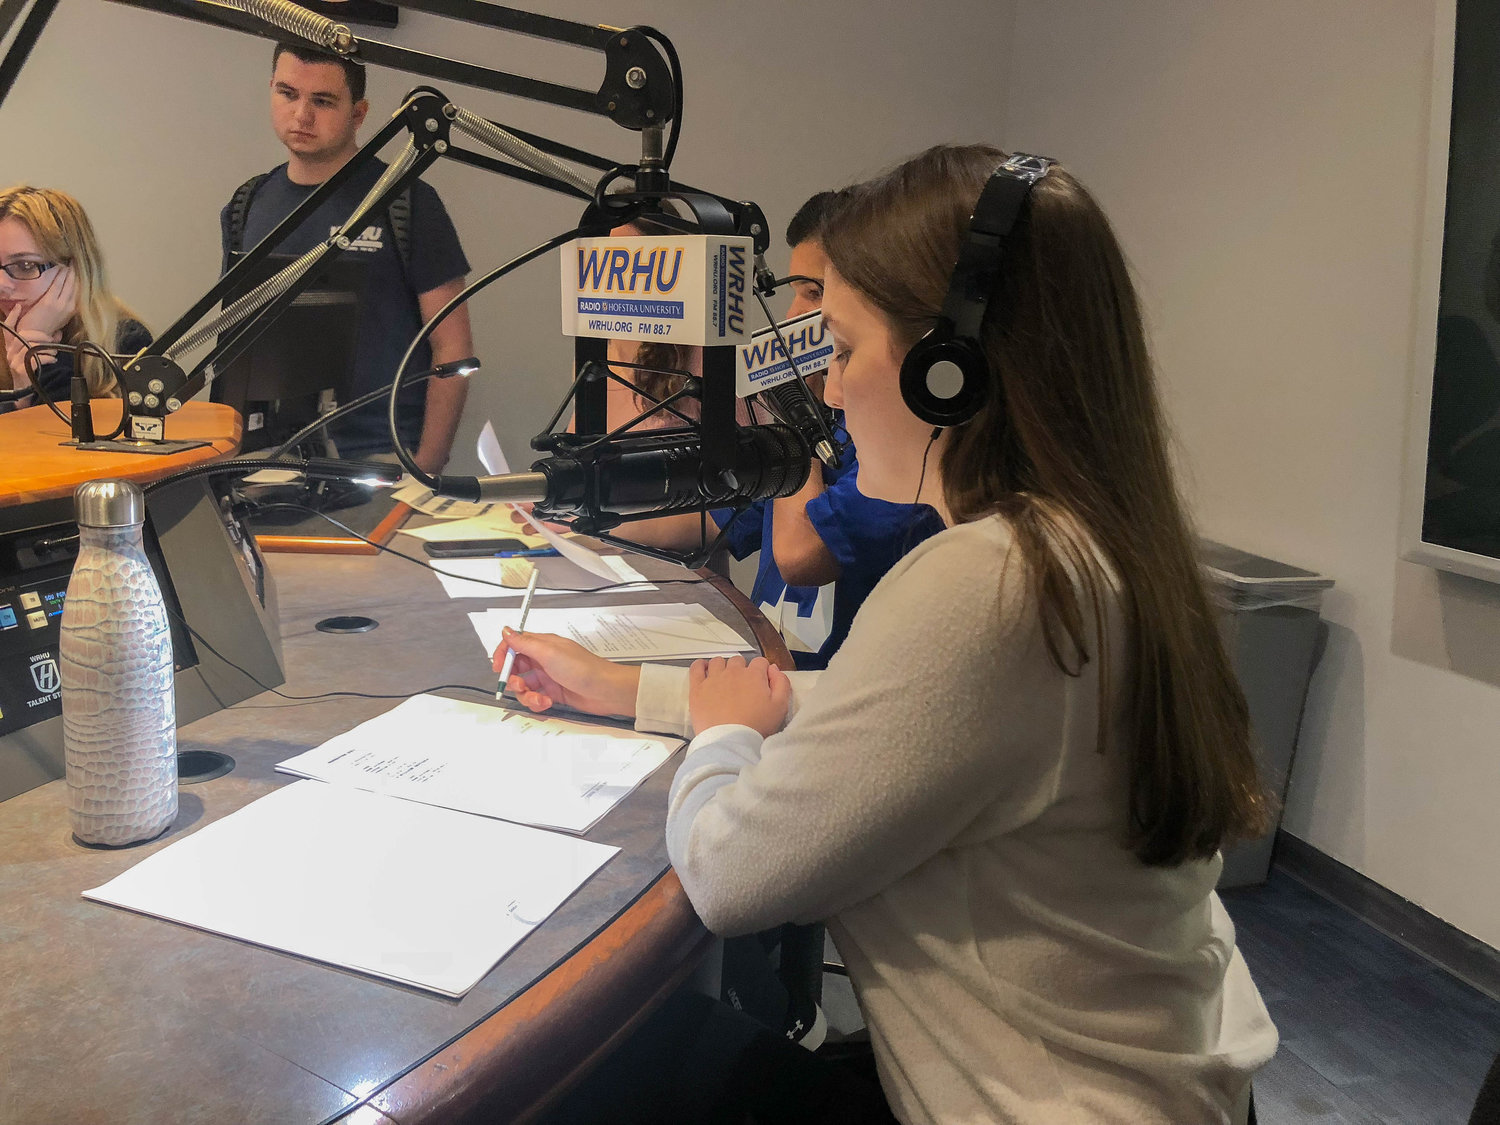 Students can participate in a number of different talk shows at the station, including Hofstra Morning Wake Up Call, Newsline and The Locker Room.